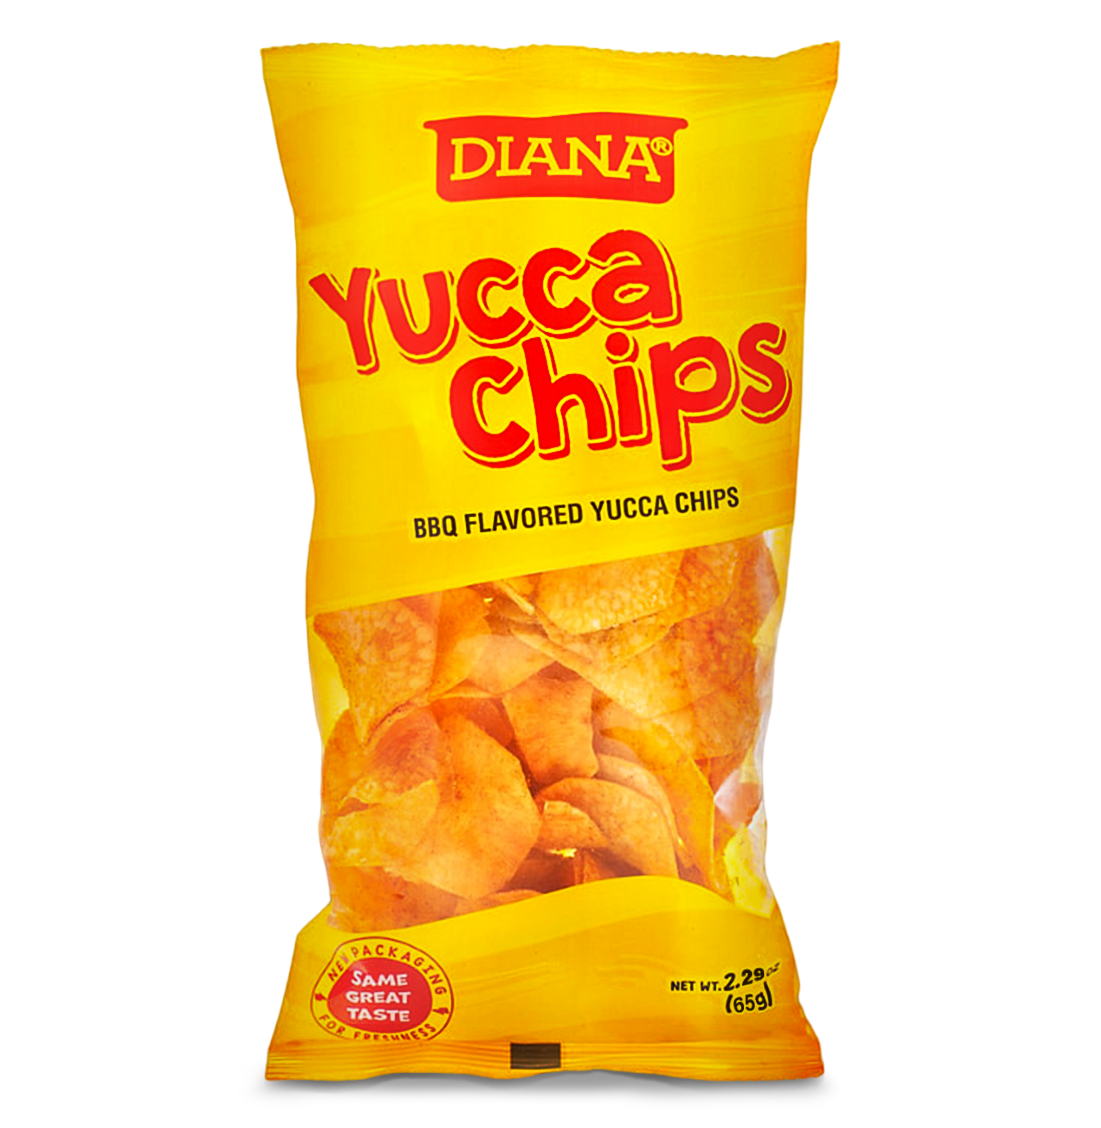 Yucca Cassava chips flavored with barbeque